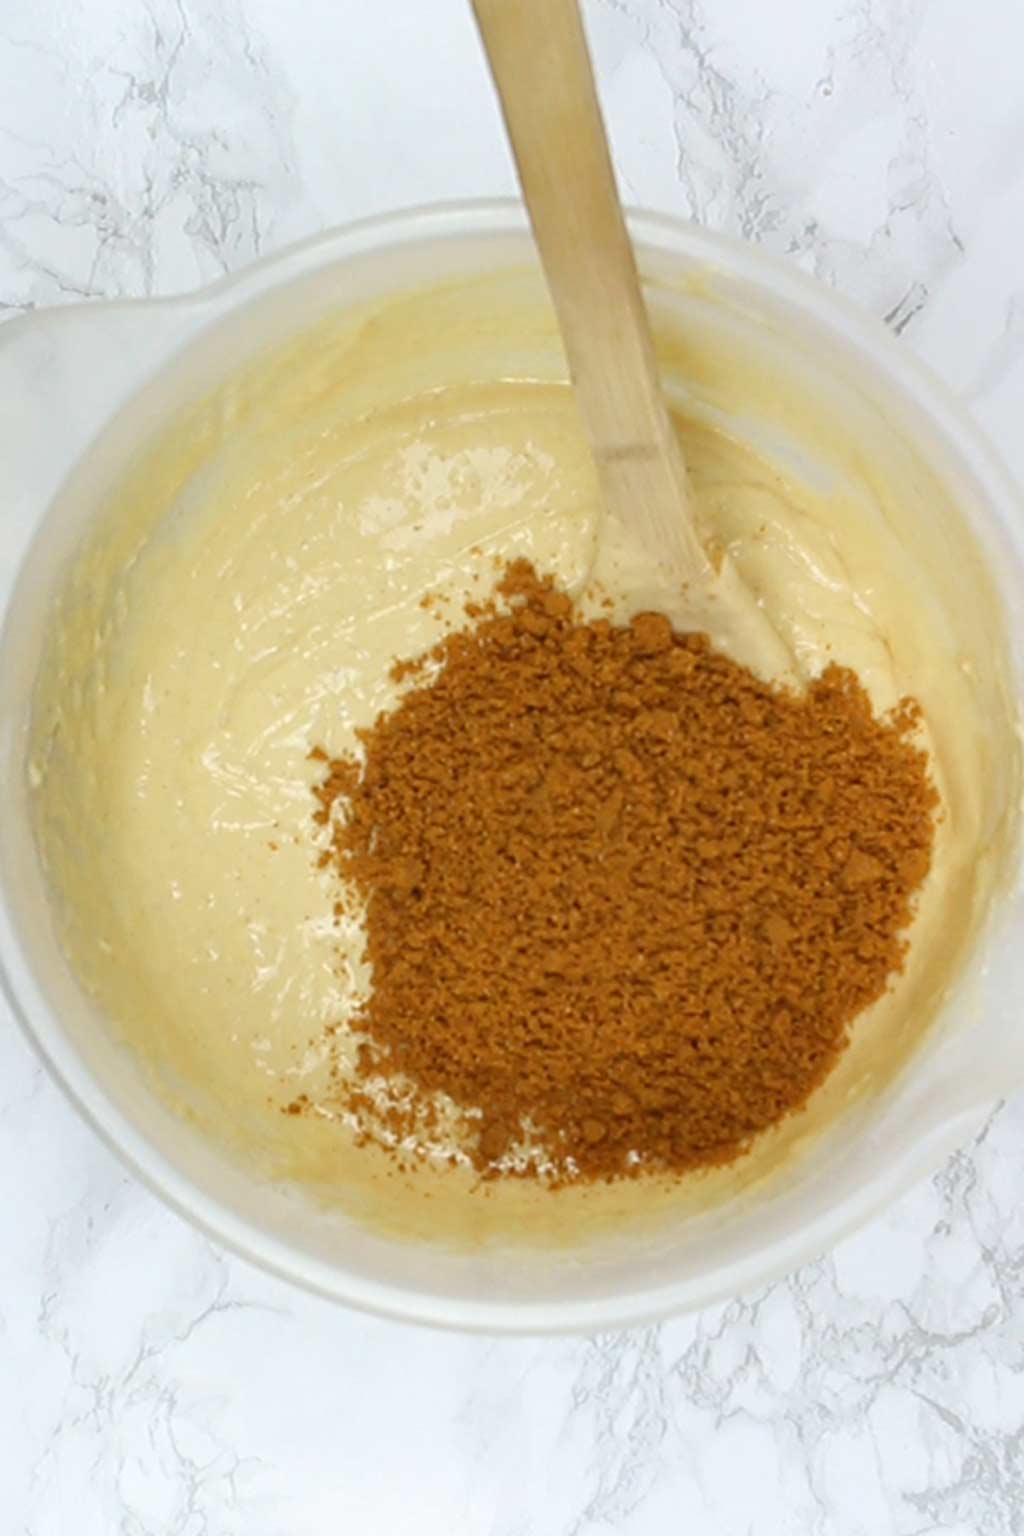 biscuit crumbs in the cake batter